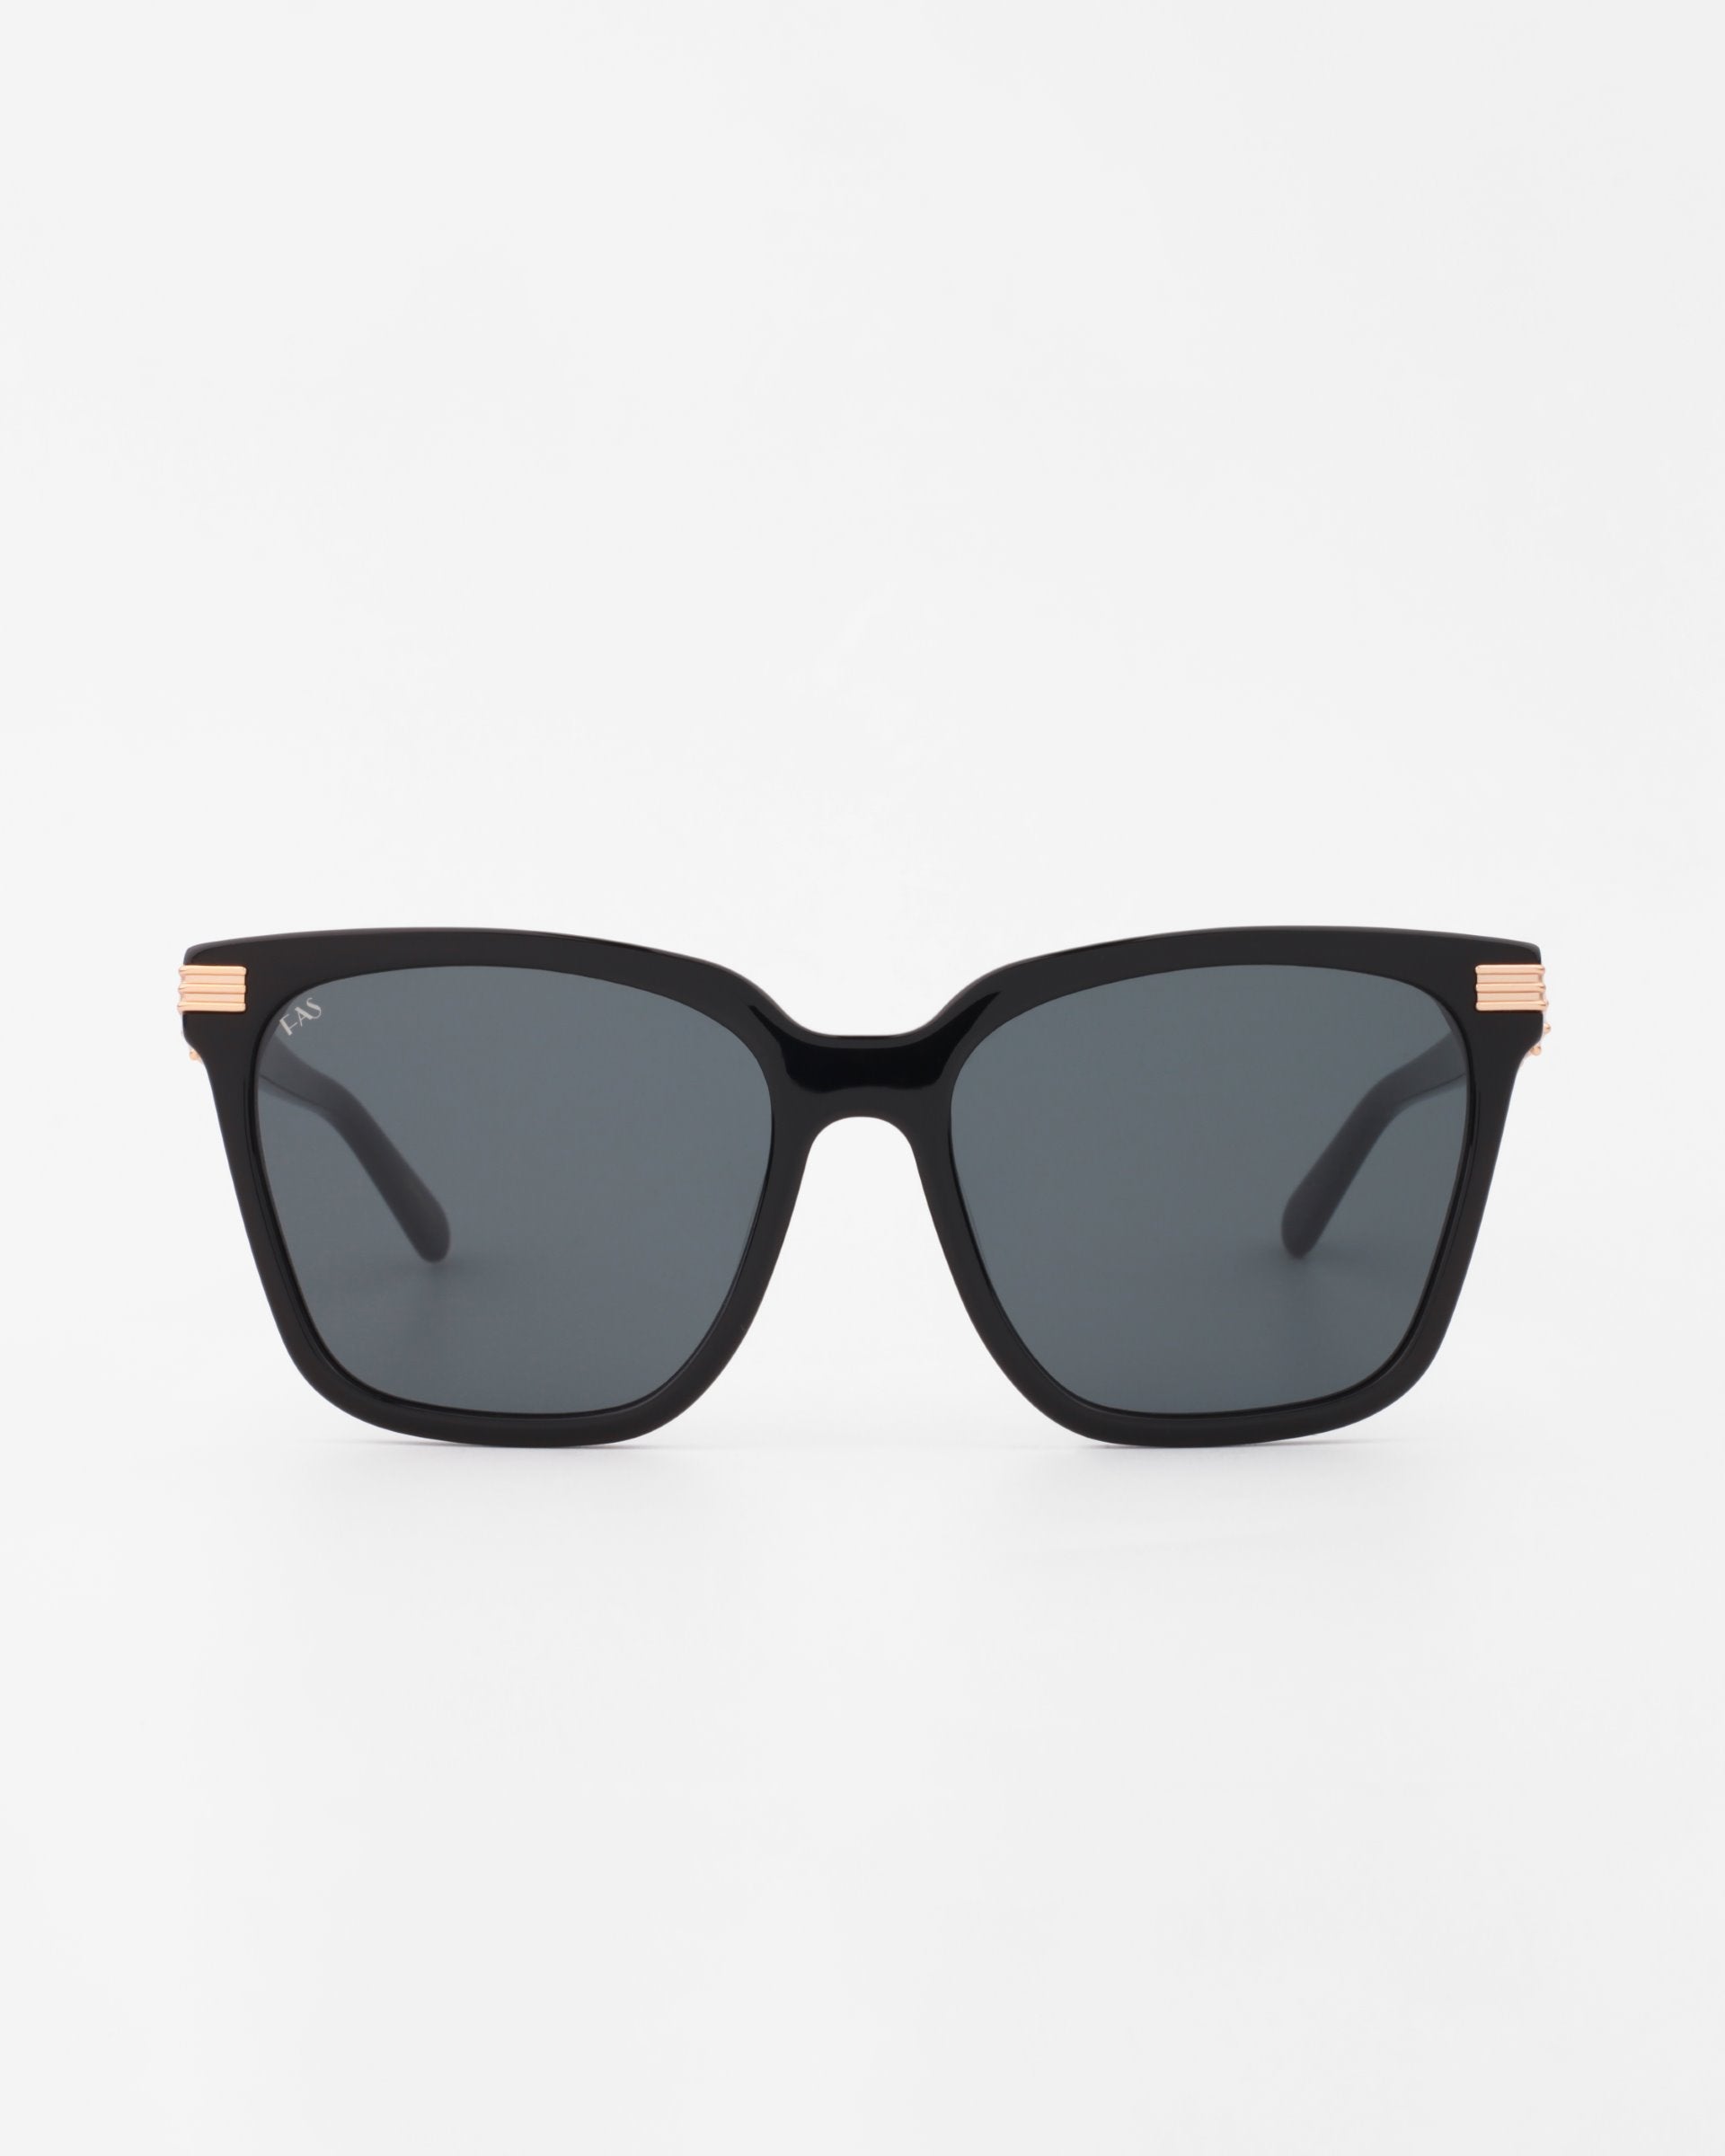 A pair of black square-framed Gaia sunglasses with dark, UV-protected lenses. The slightly thick, minimalist handmade acetate frames feature 18-karat gold-plated accents near the hinges. The background is plain white. For Art's Sake®.